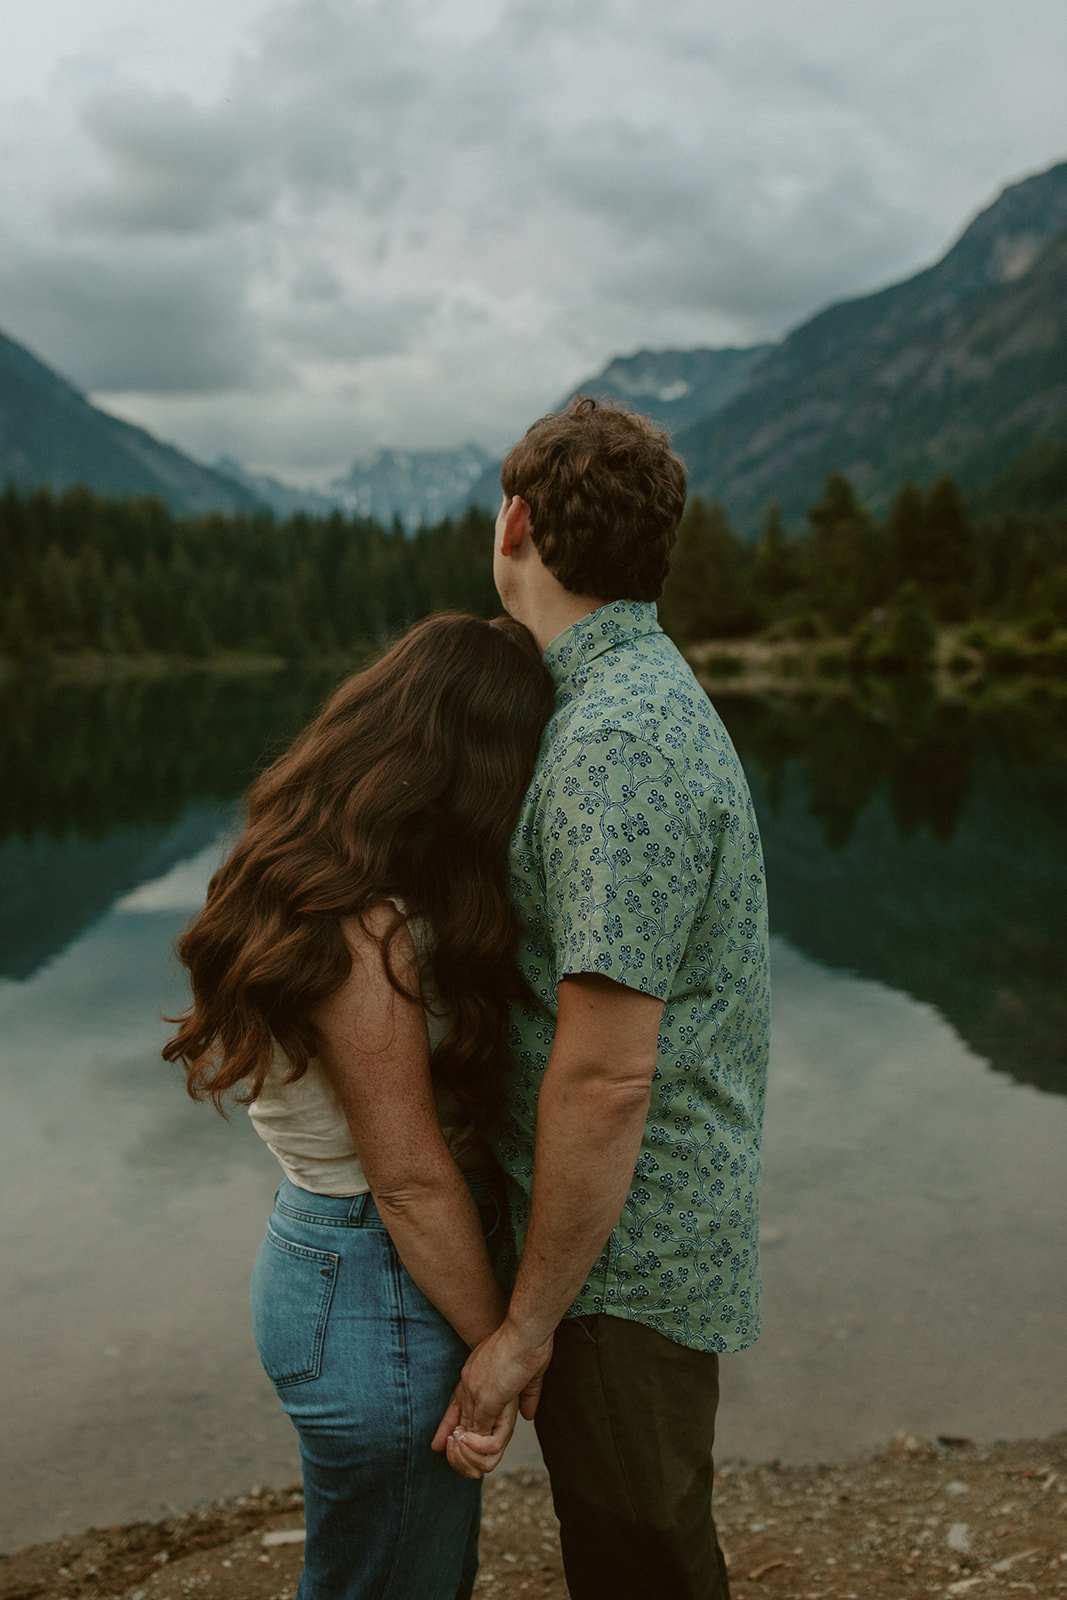 A Gold Creek Pond Outdoor Engagement Session - Shanean + Ian (102).jpg